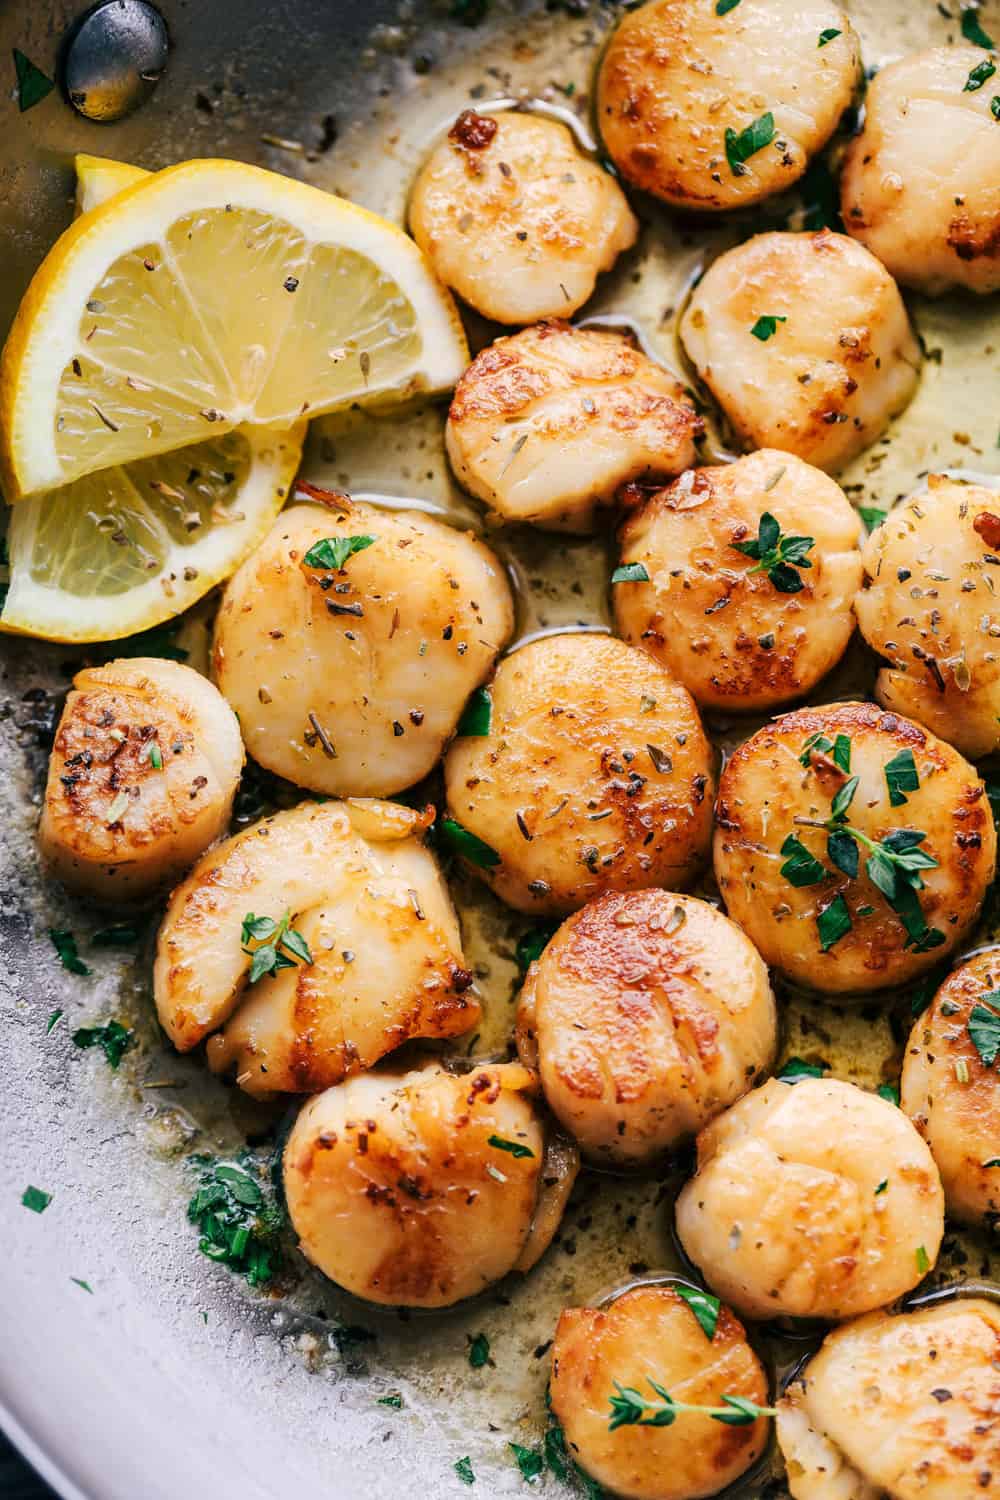 Scallops cooking in pan.